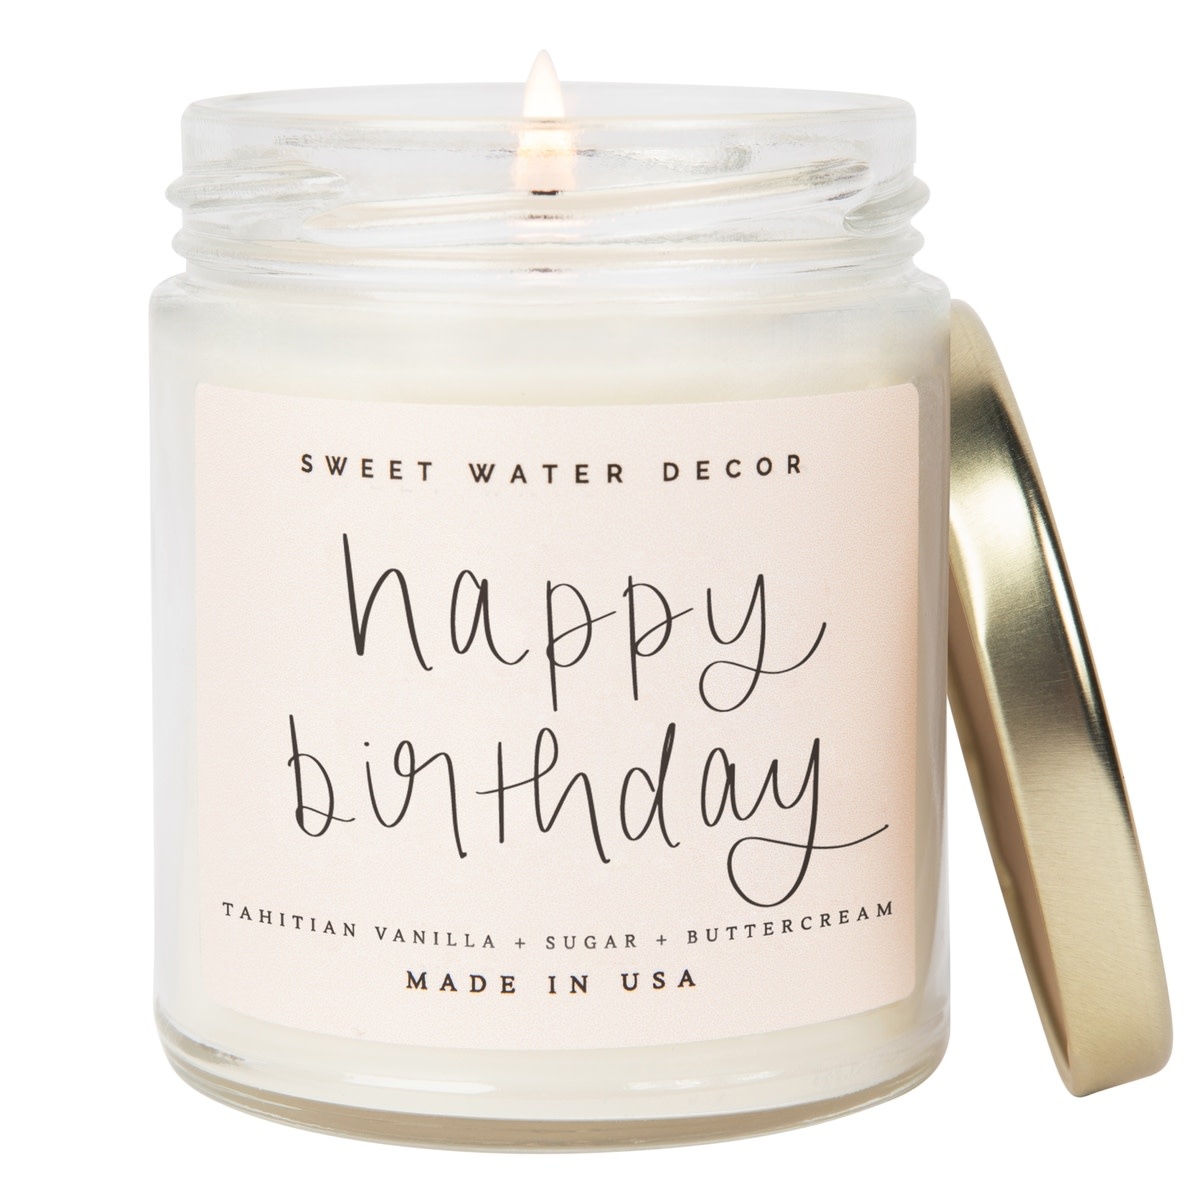 Sweet Water Decor Happy Birthday 9 oz Soy Candle